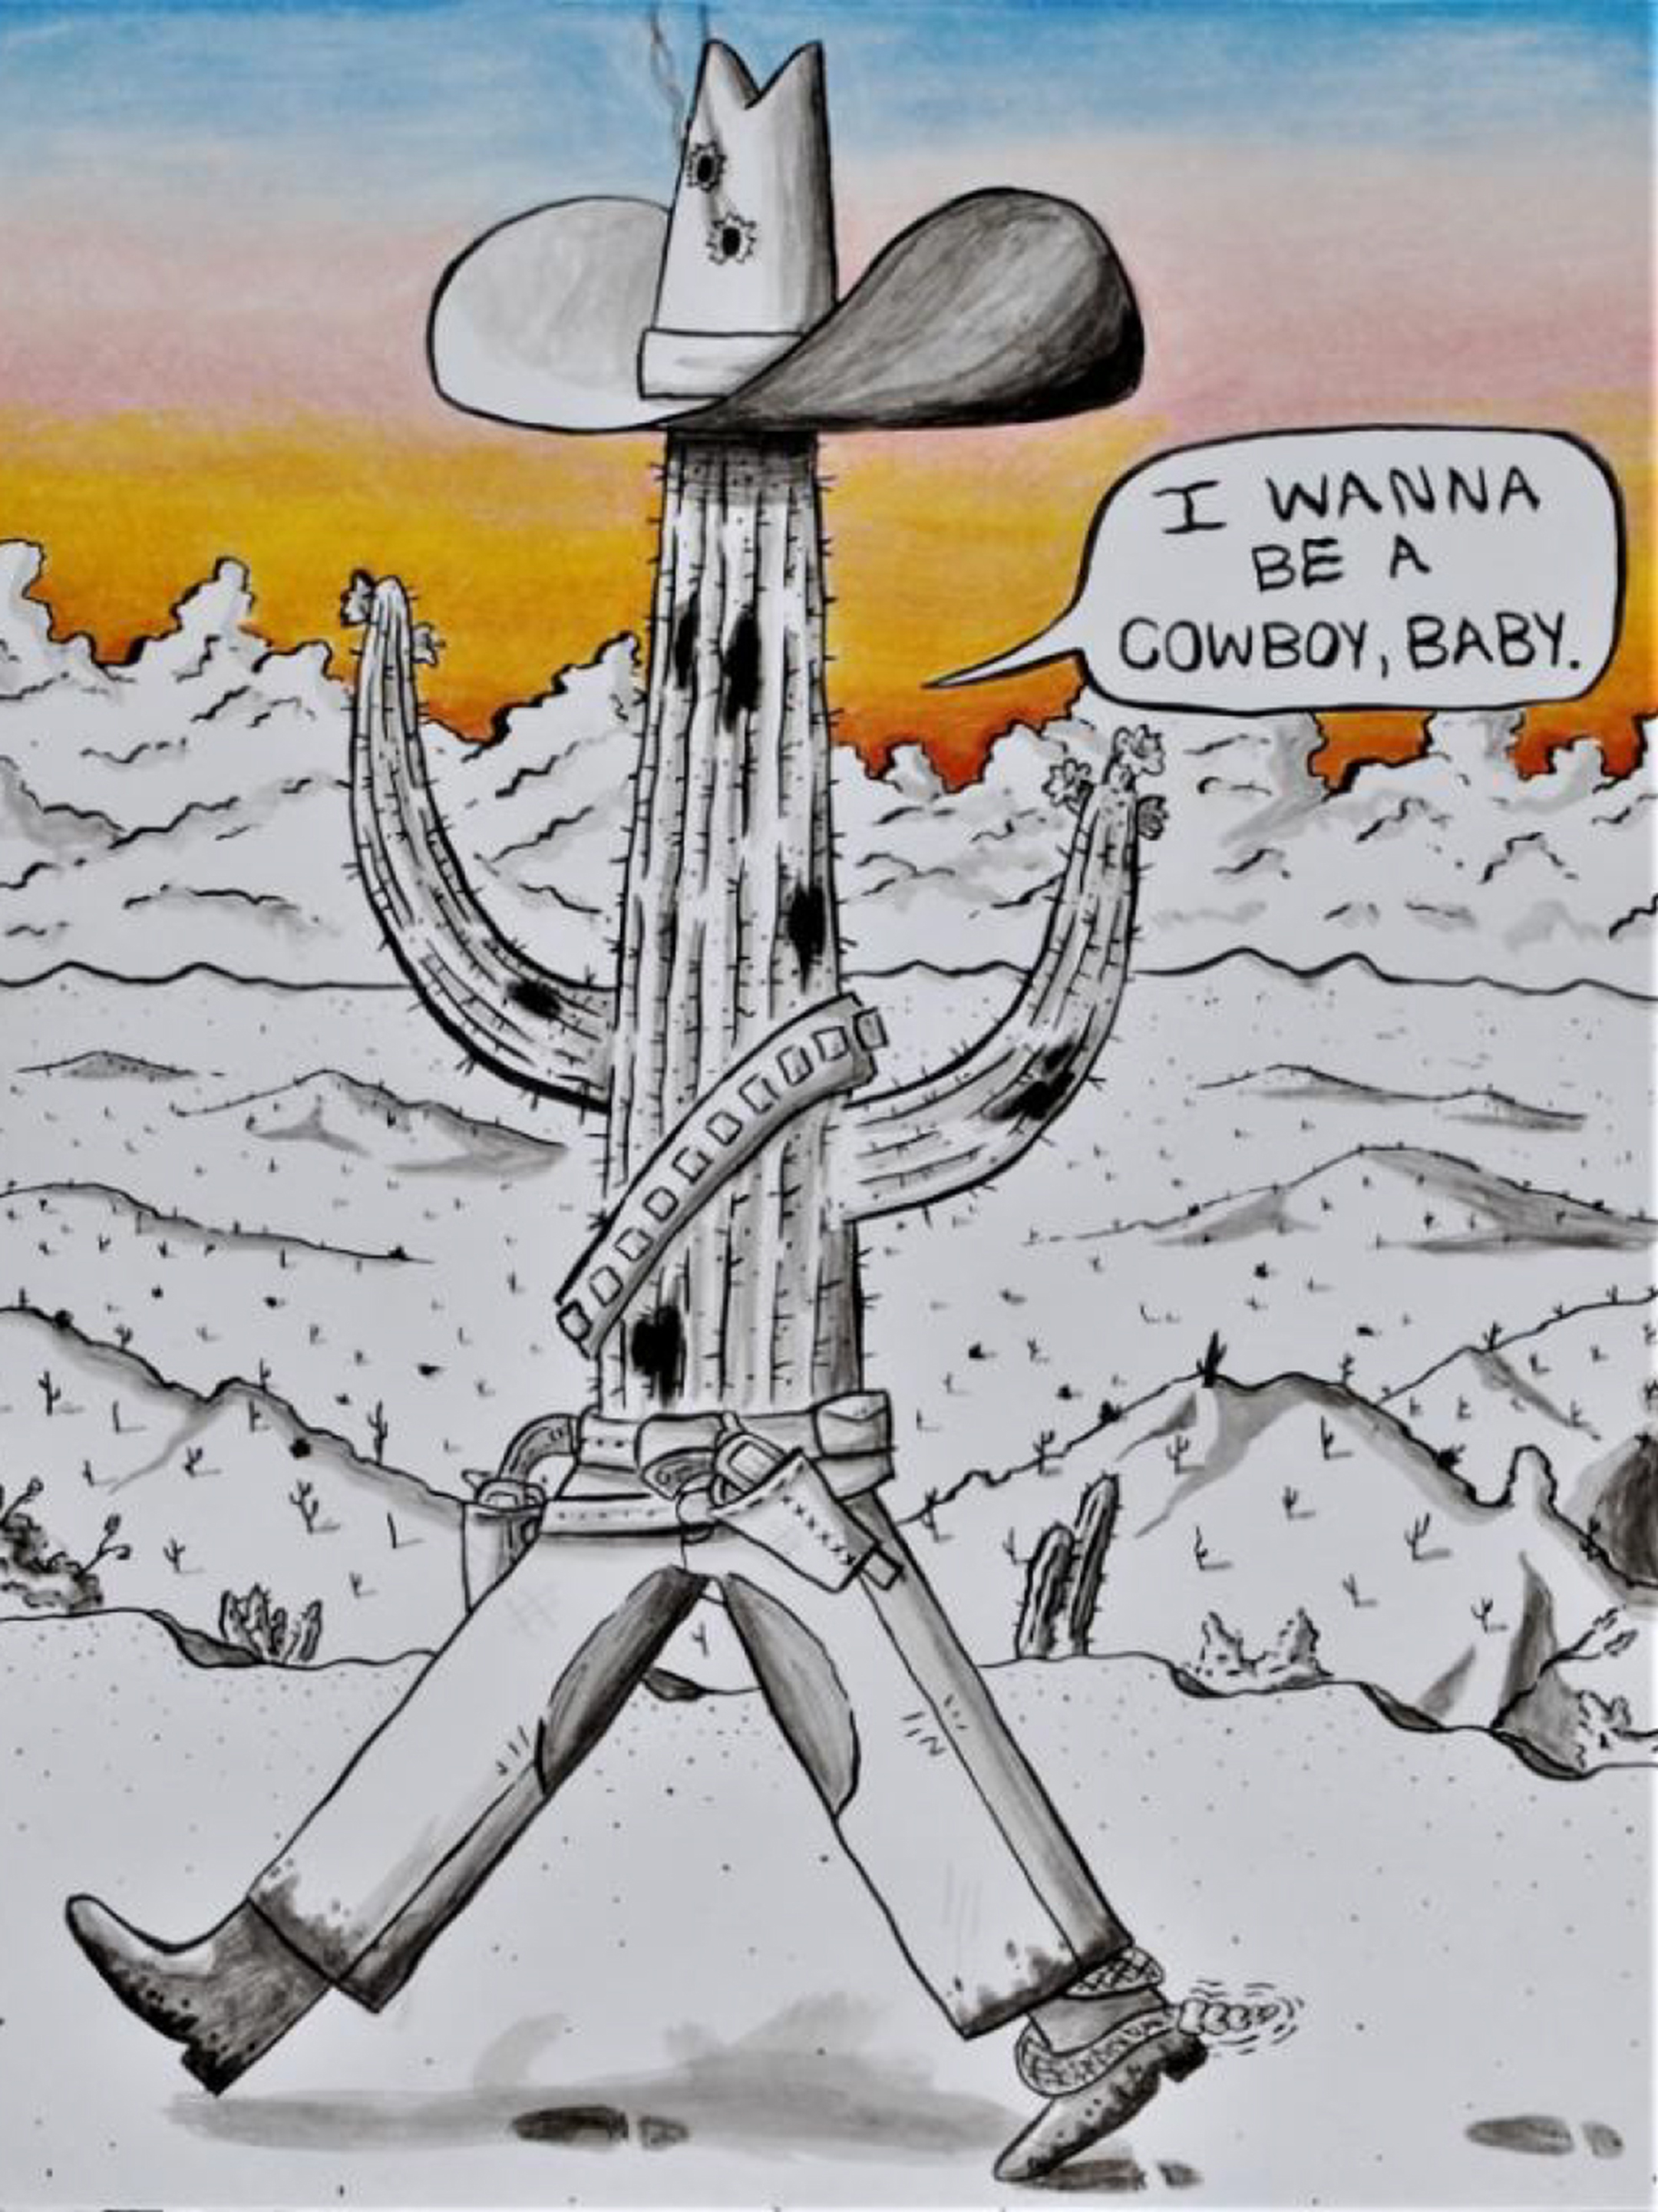 Black and white illustration of a cactus walking like a person, wearing a cowboy hat, pants and boots, and saying I wanna be a cowboy baby